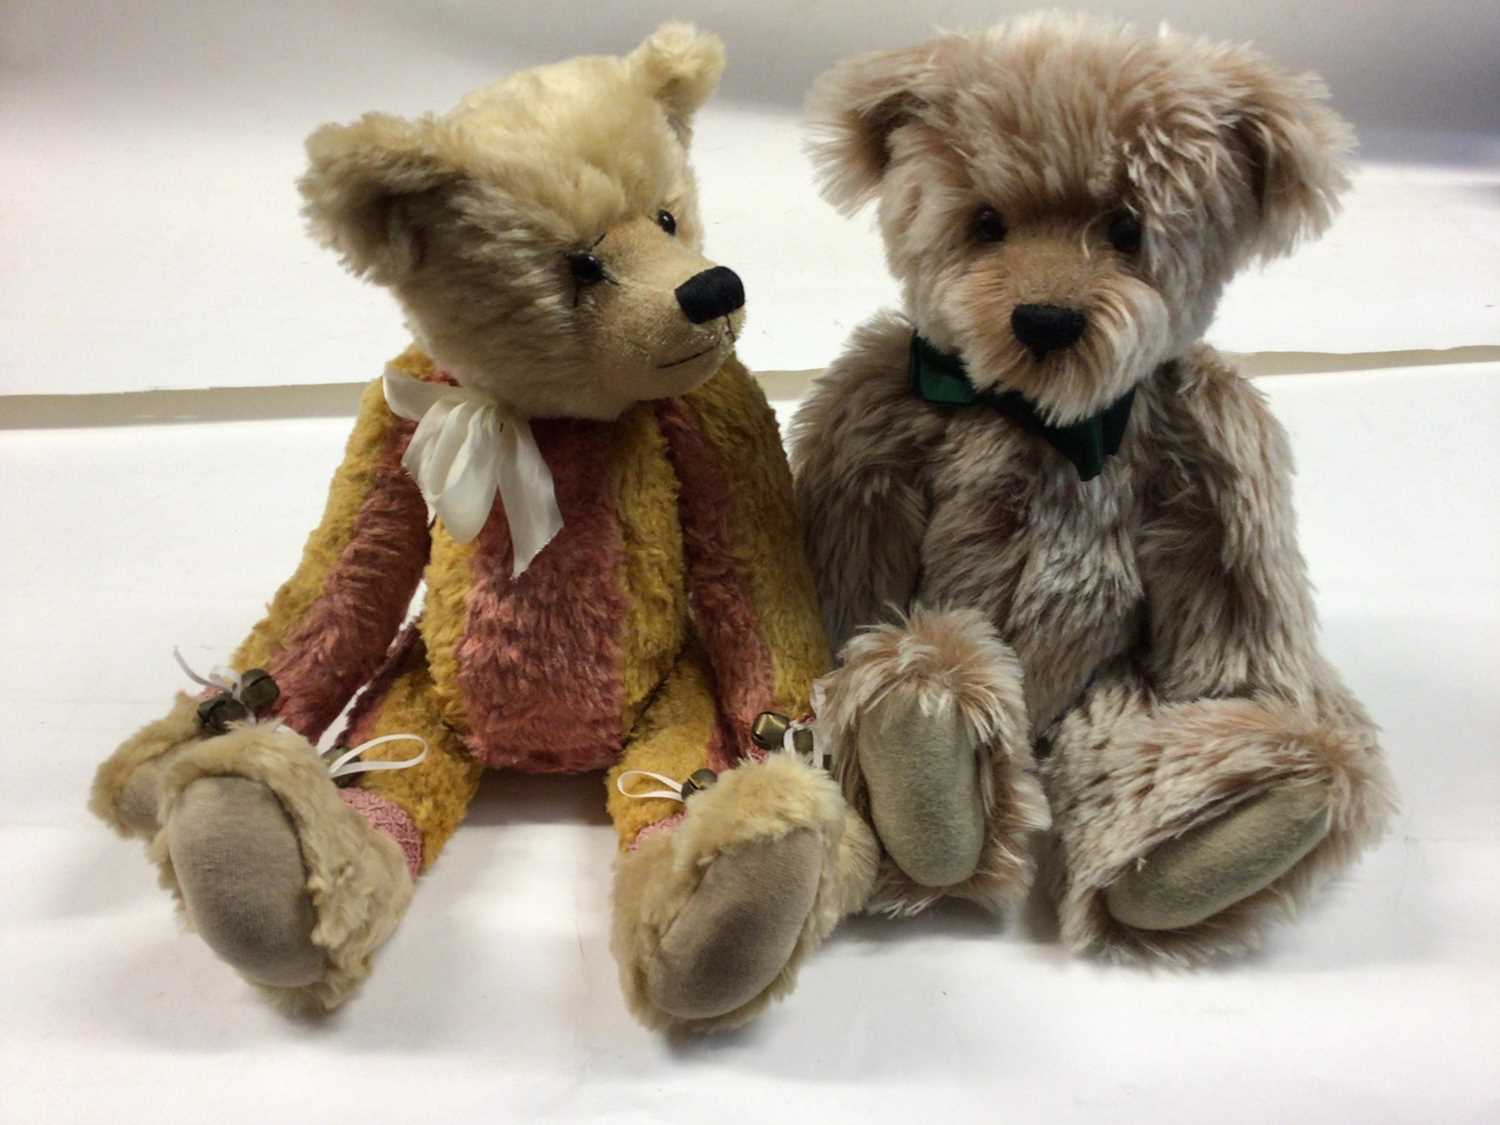 Lot 107 - Teddy Bears - Modern designers and artist bears. Makers include Barton Bears,Steiner, Albion Bears, Appletree Bears, stripped pink and golden mohair Clarence by Kathleen Ann Holian, Bluebell Bears...